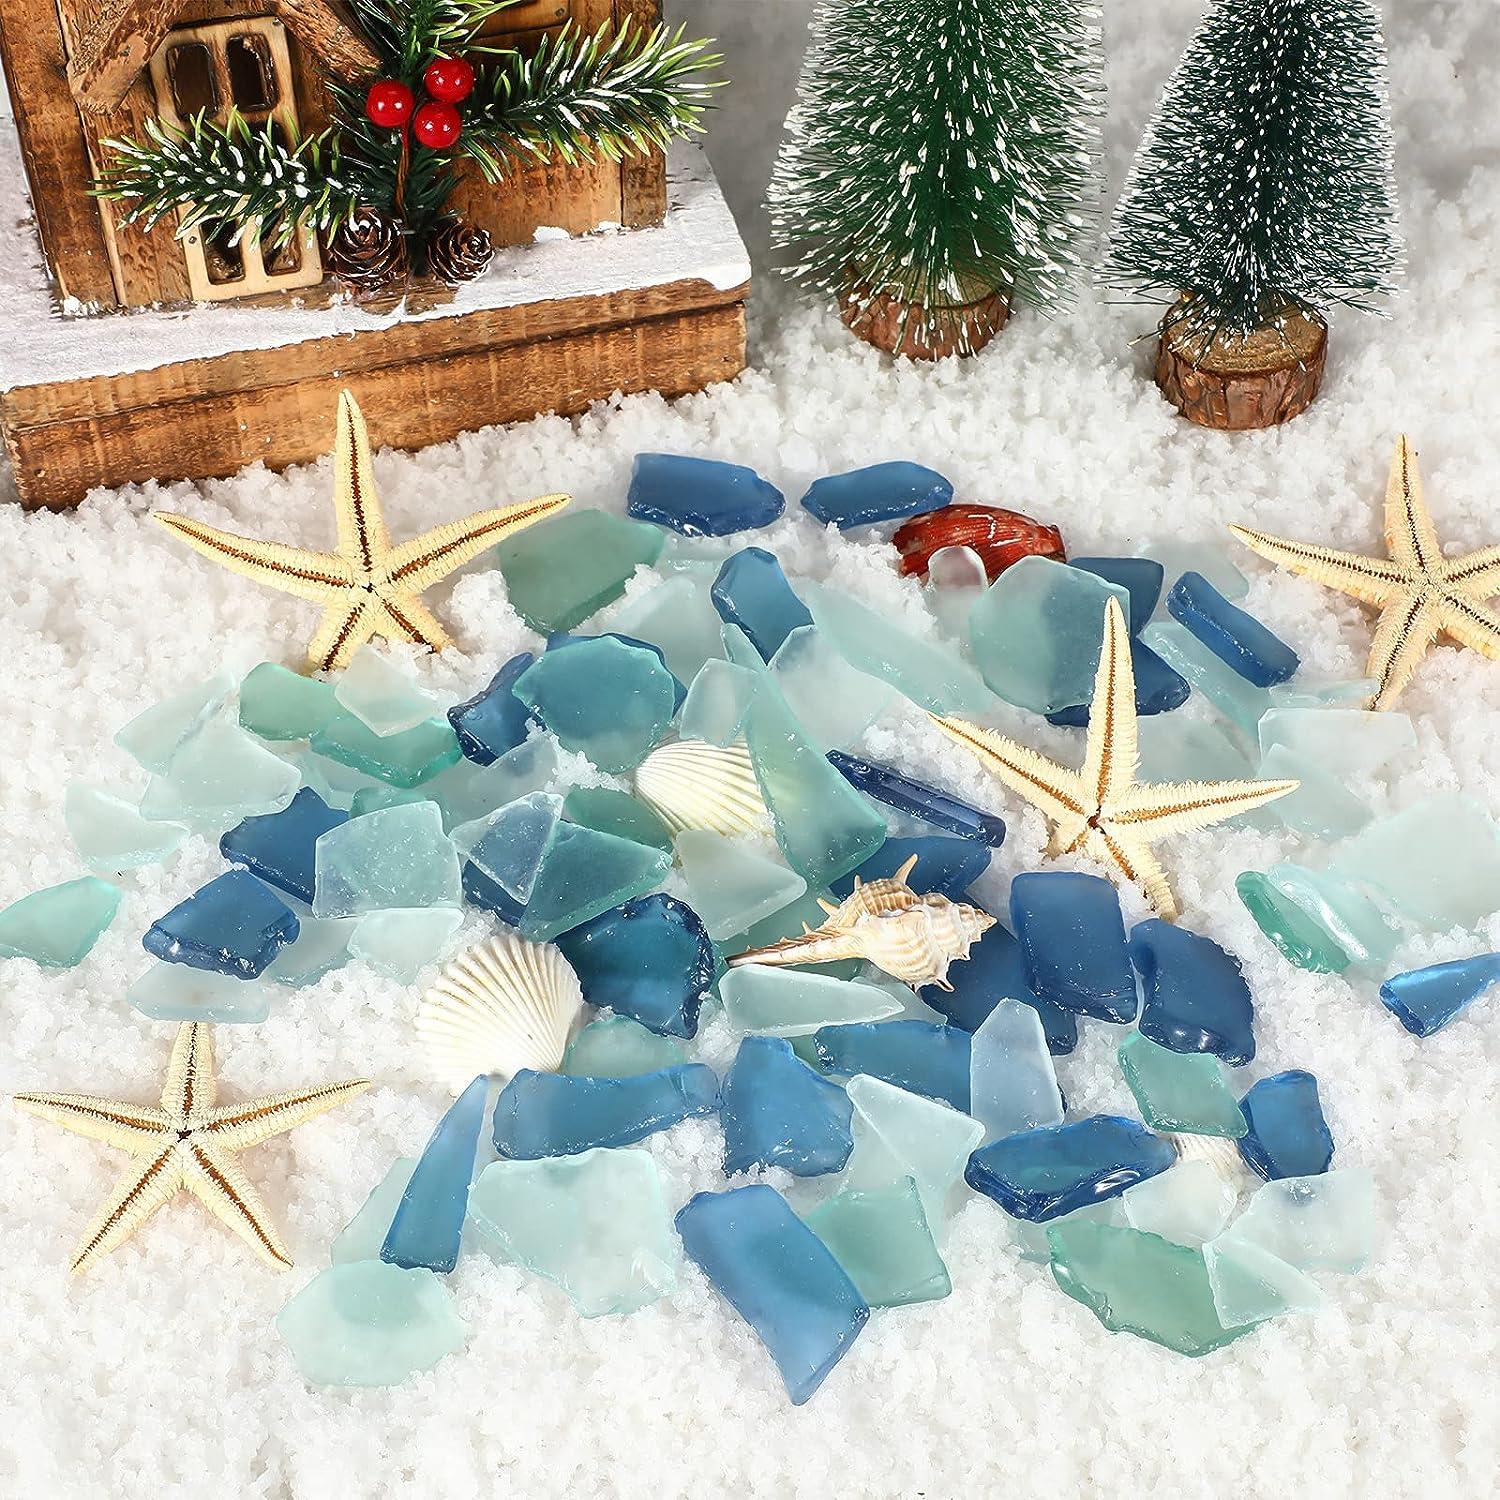 Giftvest Sea Glass for Crafts - Decorative Frosted Seaglass Pieces - 16oz -  Vase Filler, DIY Art Craft Supplies - Beach Wedding, Home Dec